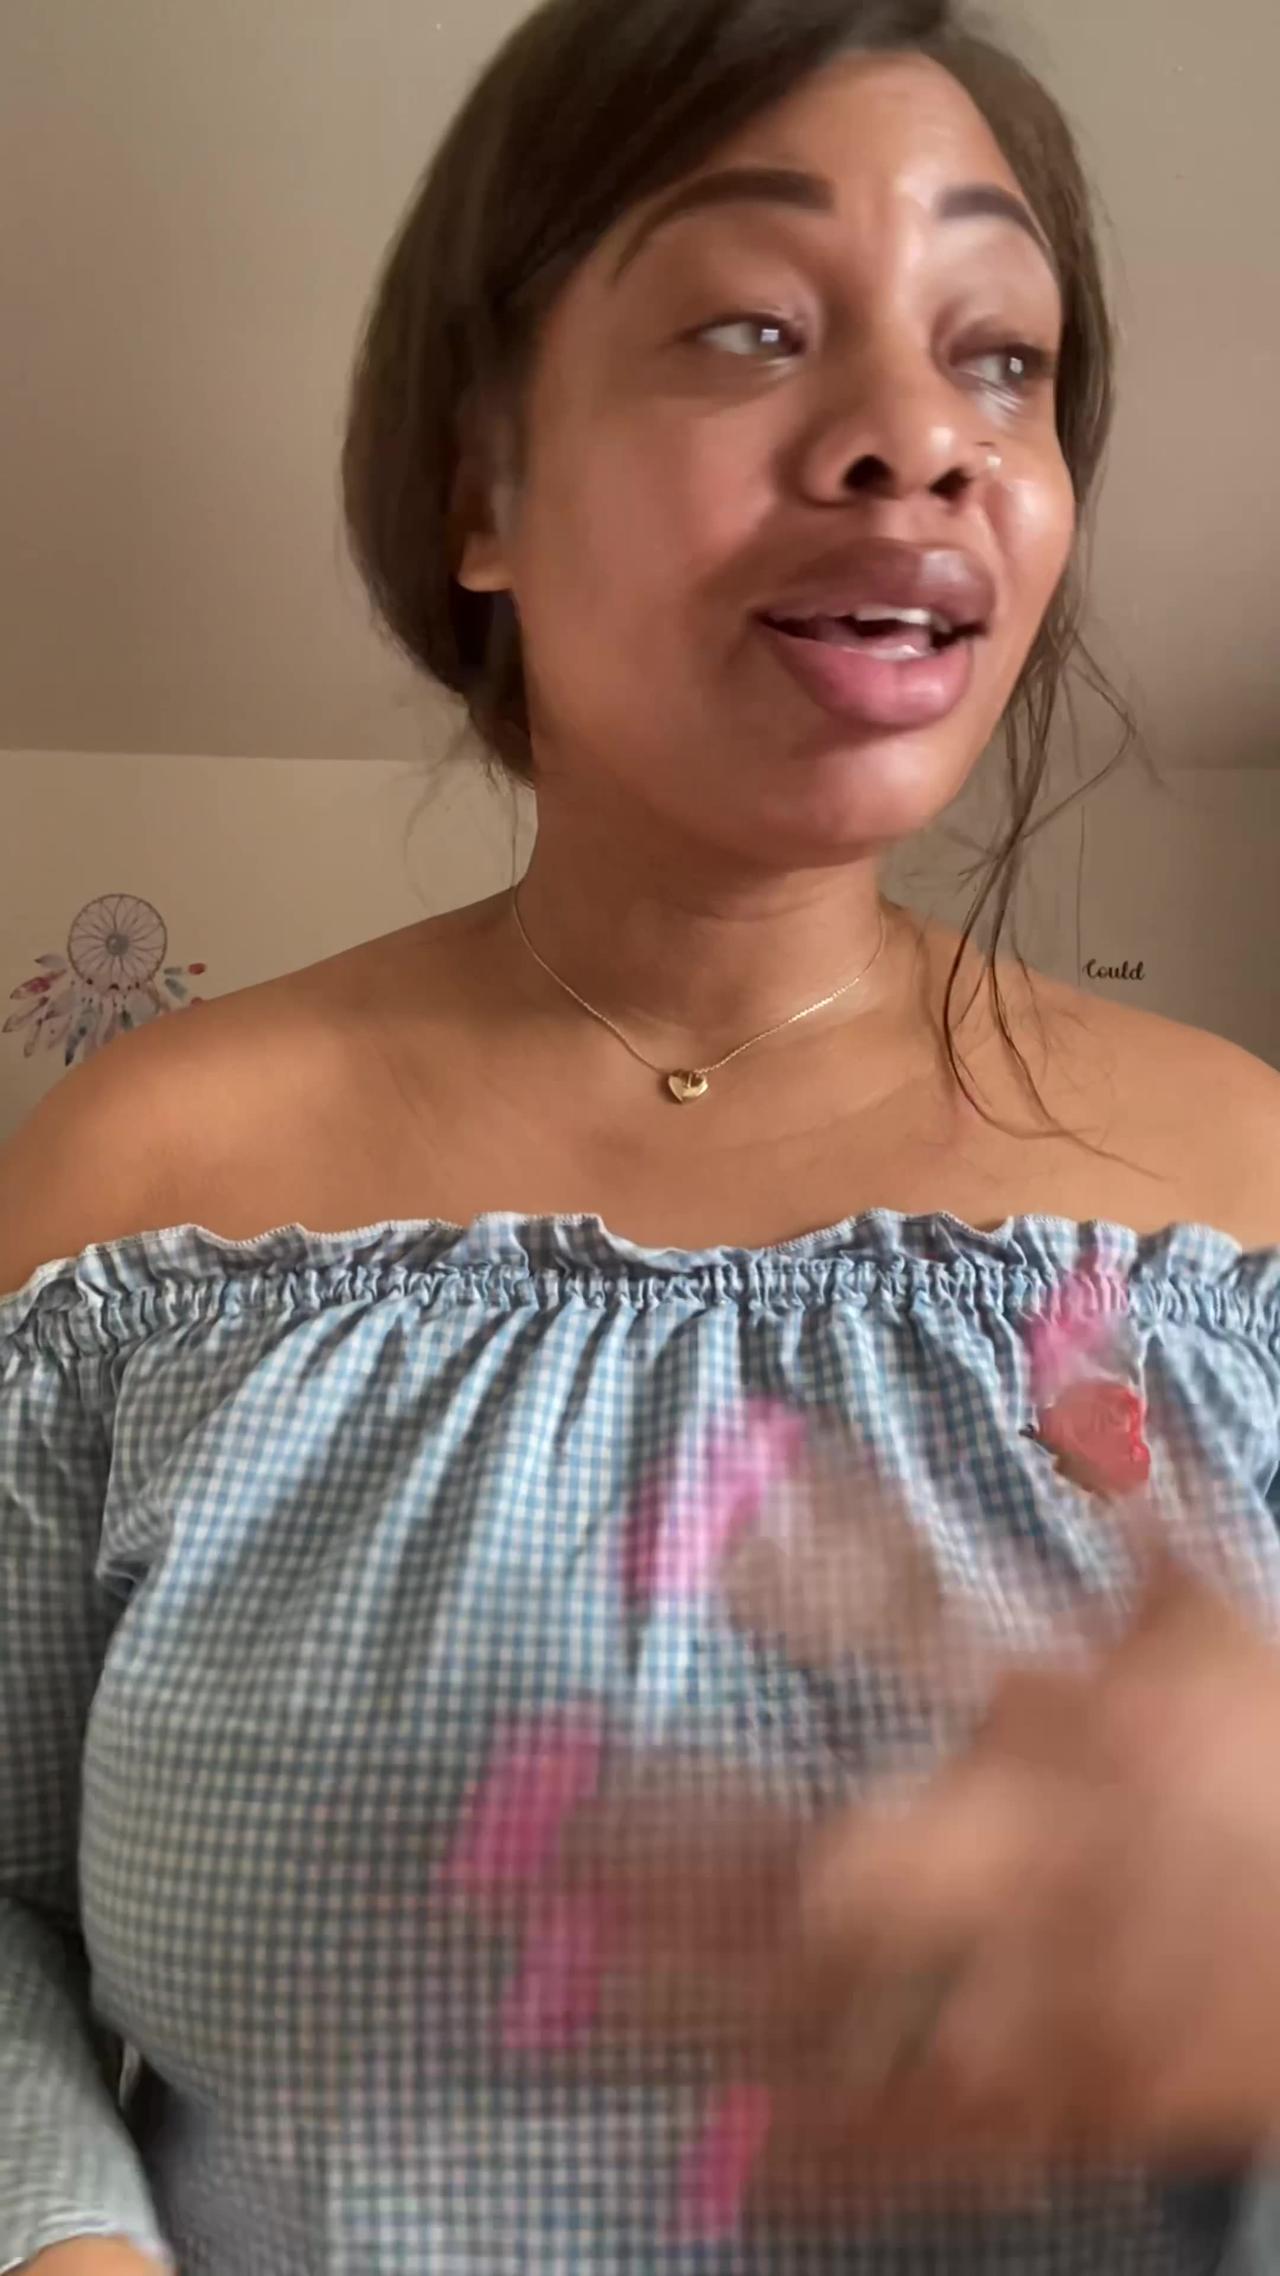 “Old racist sl@ps Black women” - Full story with video